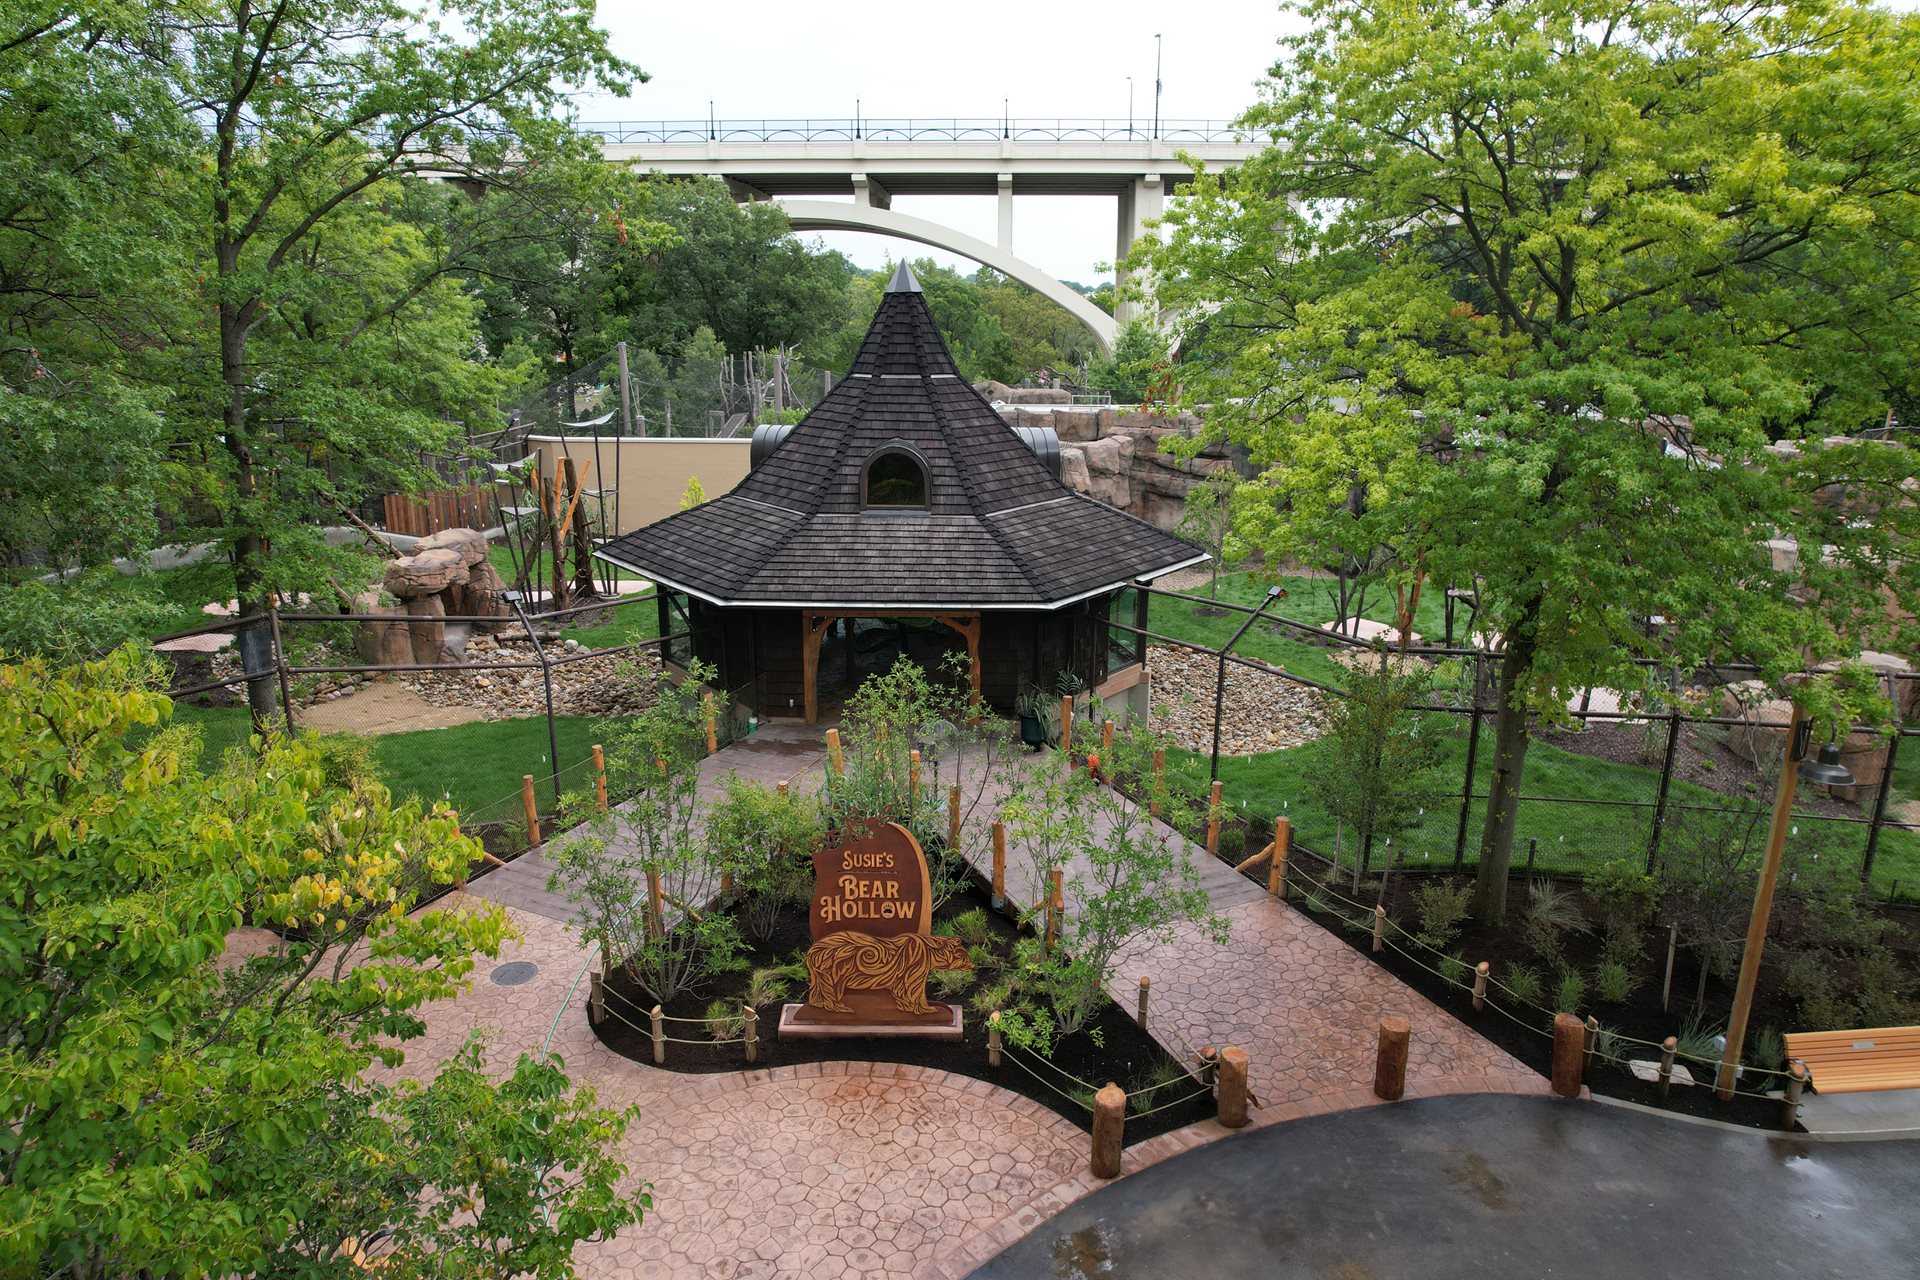 Cleveland Metroparks Zoo Opens Transformative Susie’s Bear Hollow Habitat